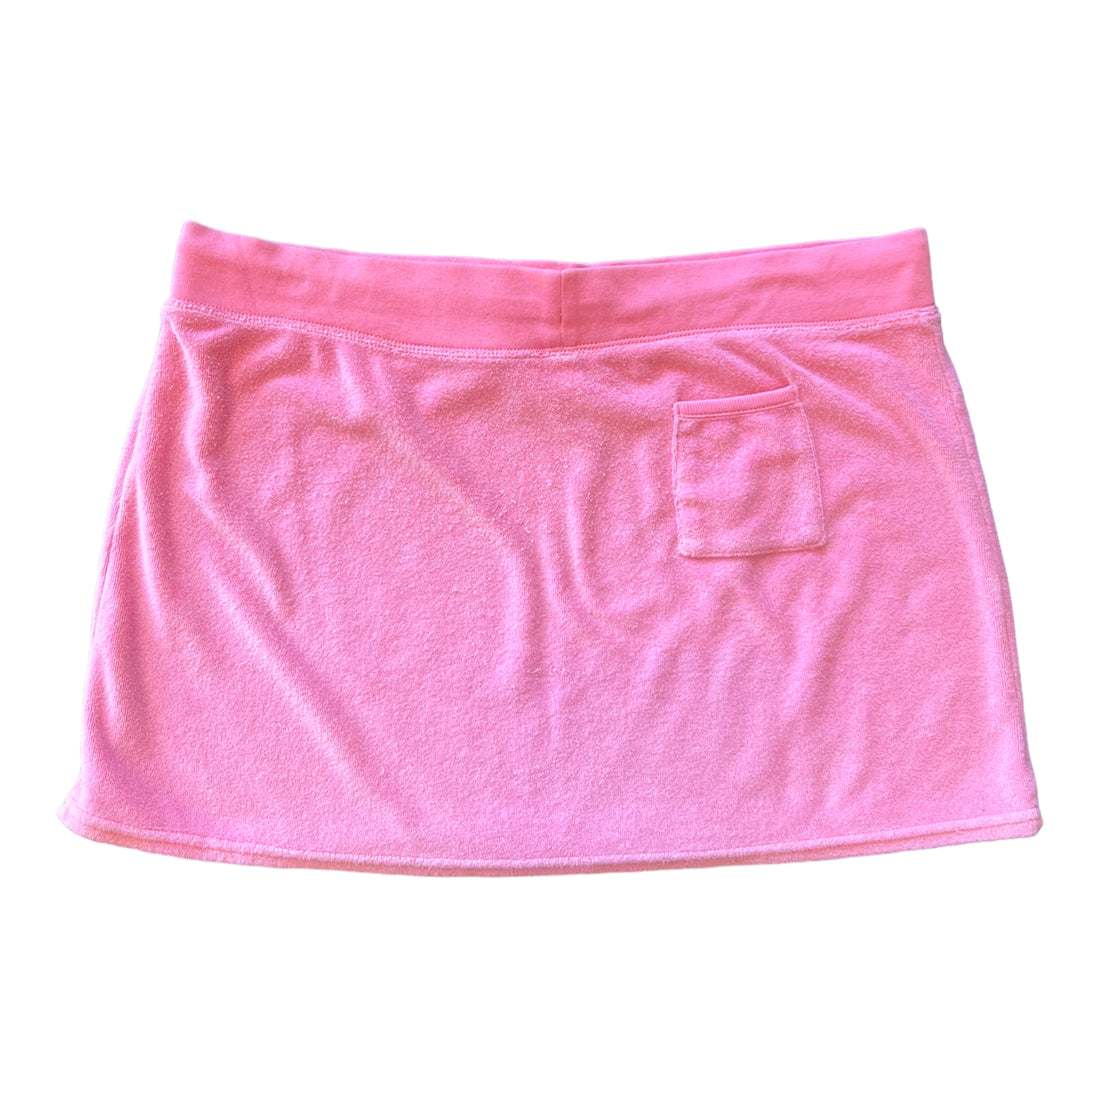 Y2K GAP TERRY CLOTH MINI SKIRT HOT GIRL PINK ‘LARGE’ - 2000S